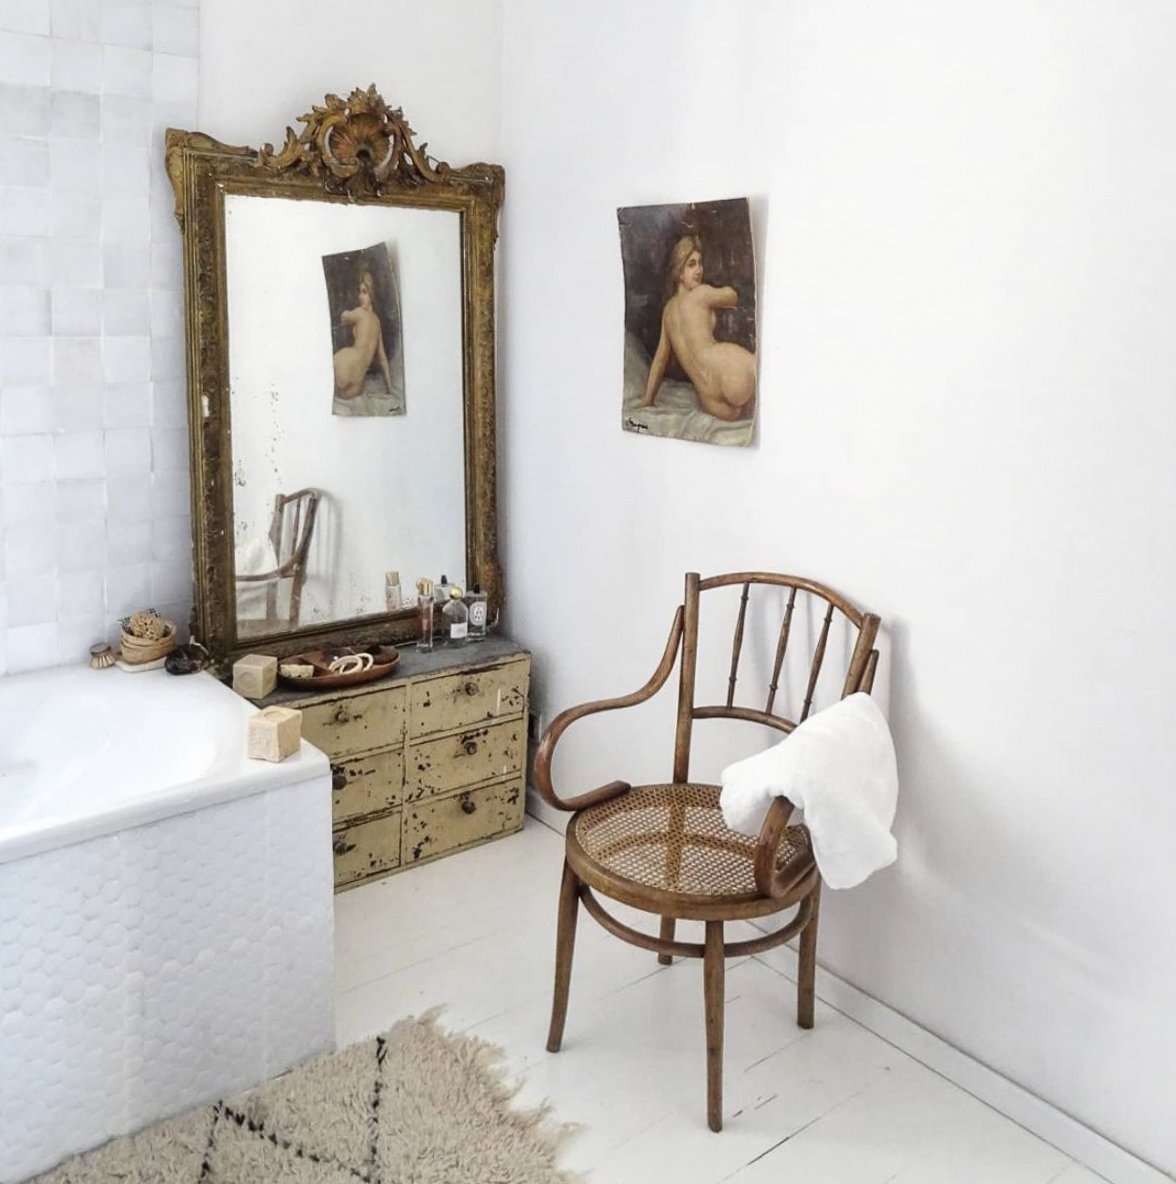 White interior of bathroom with vintage chair and large gilded mirror